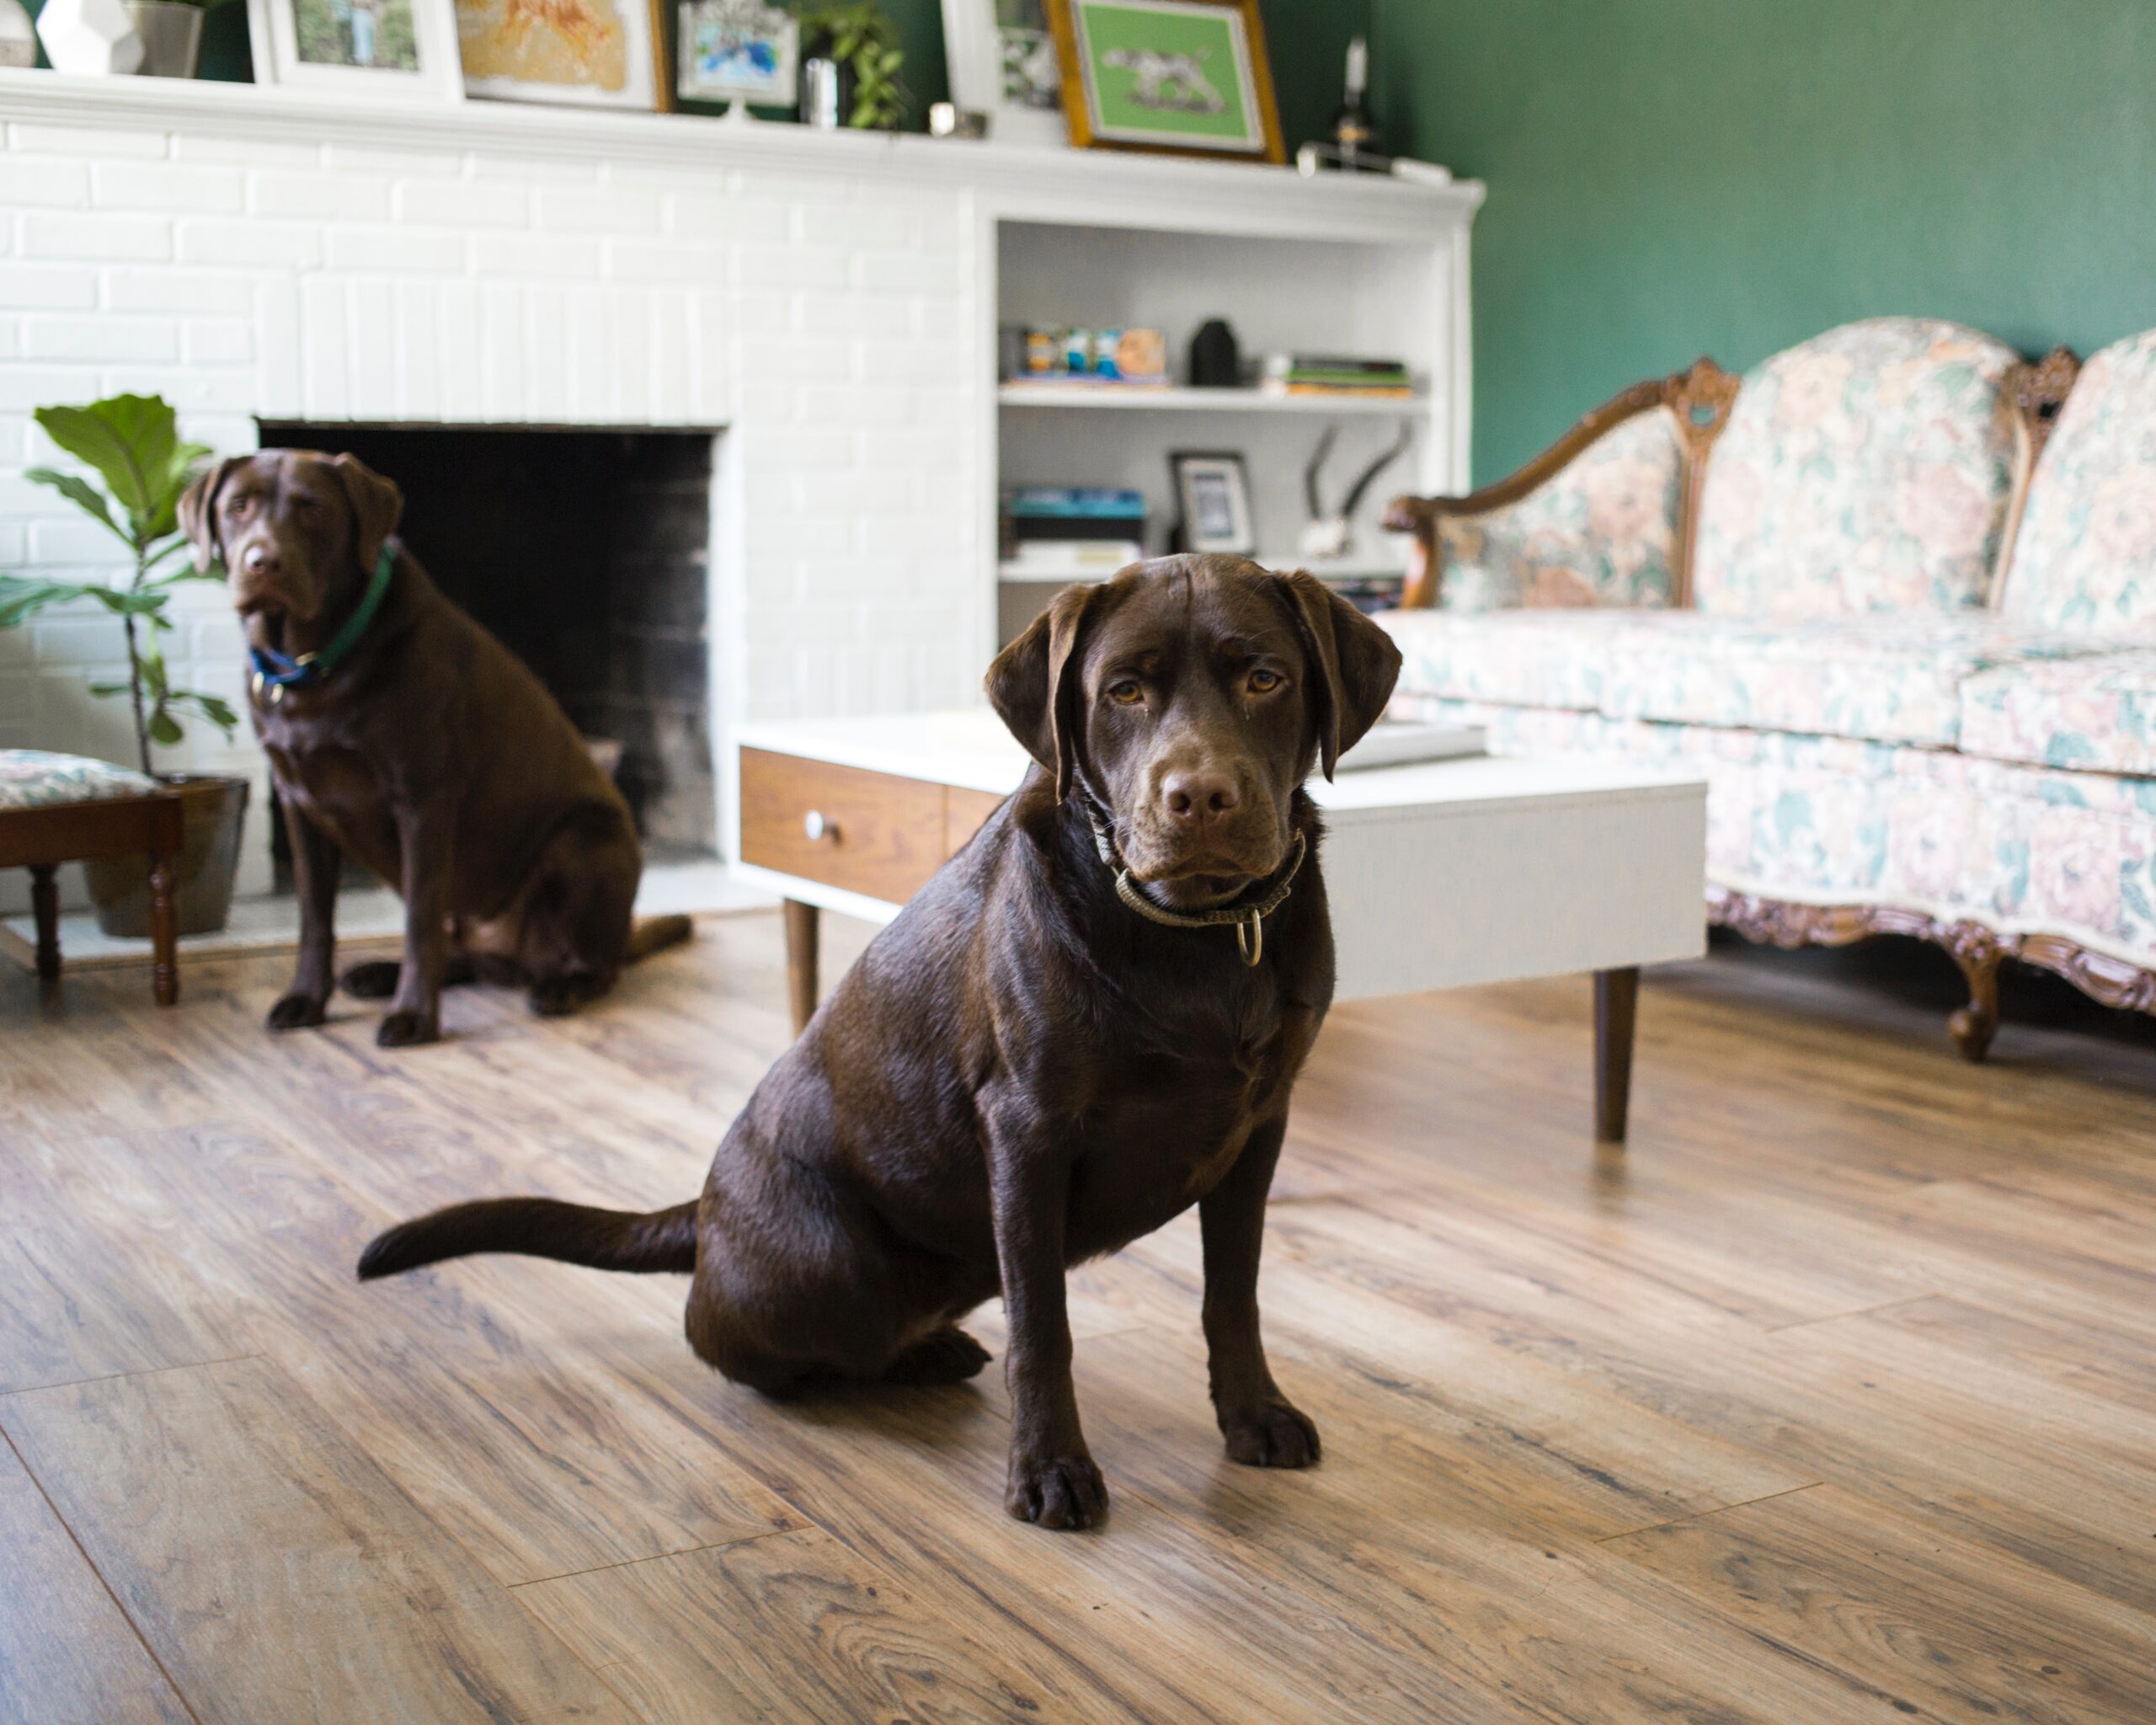 Two chocolate labradors sitting in a living room